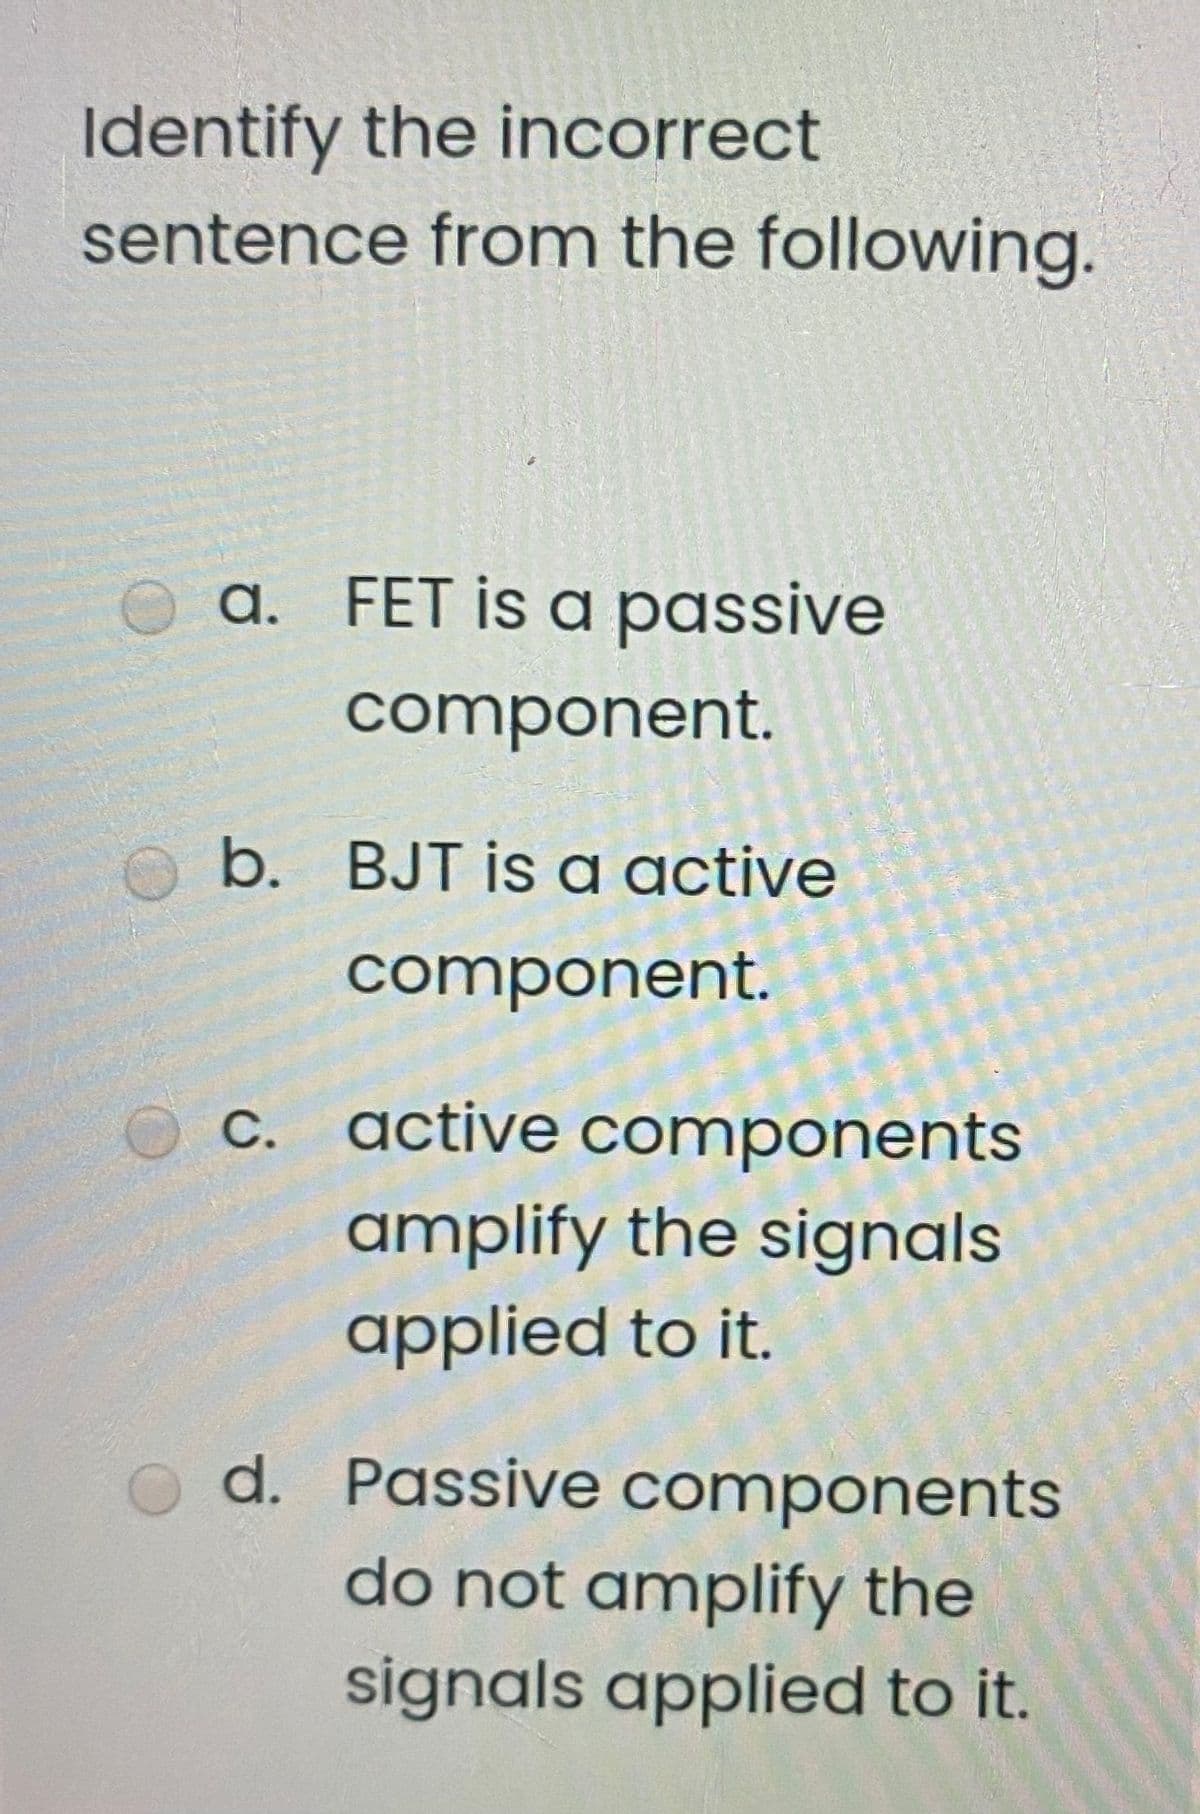 Identify the incorrect
sentence from the following.
O a. FET is a passive
component.
O b. BJT is a active
component.
C. active components
amplify the signals
applied to it.
d. Passive components
do not amplify the
signals applied to it.
